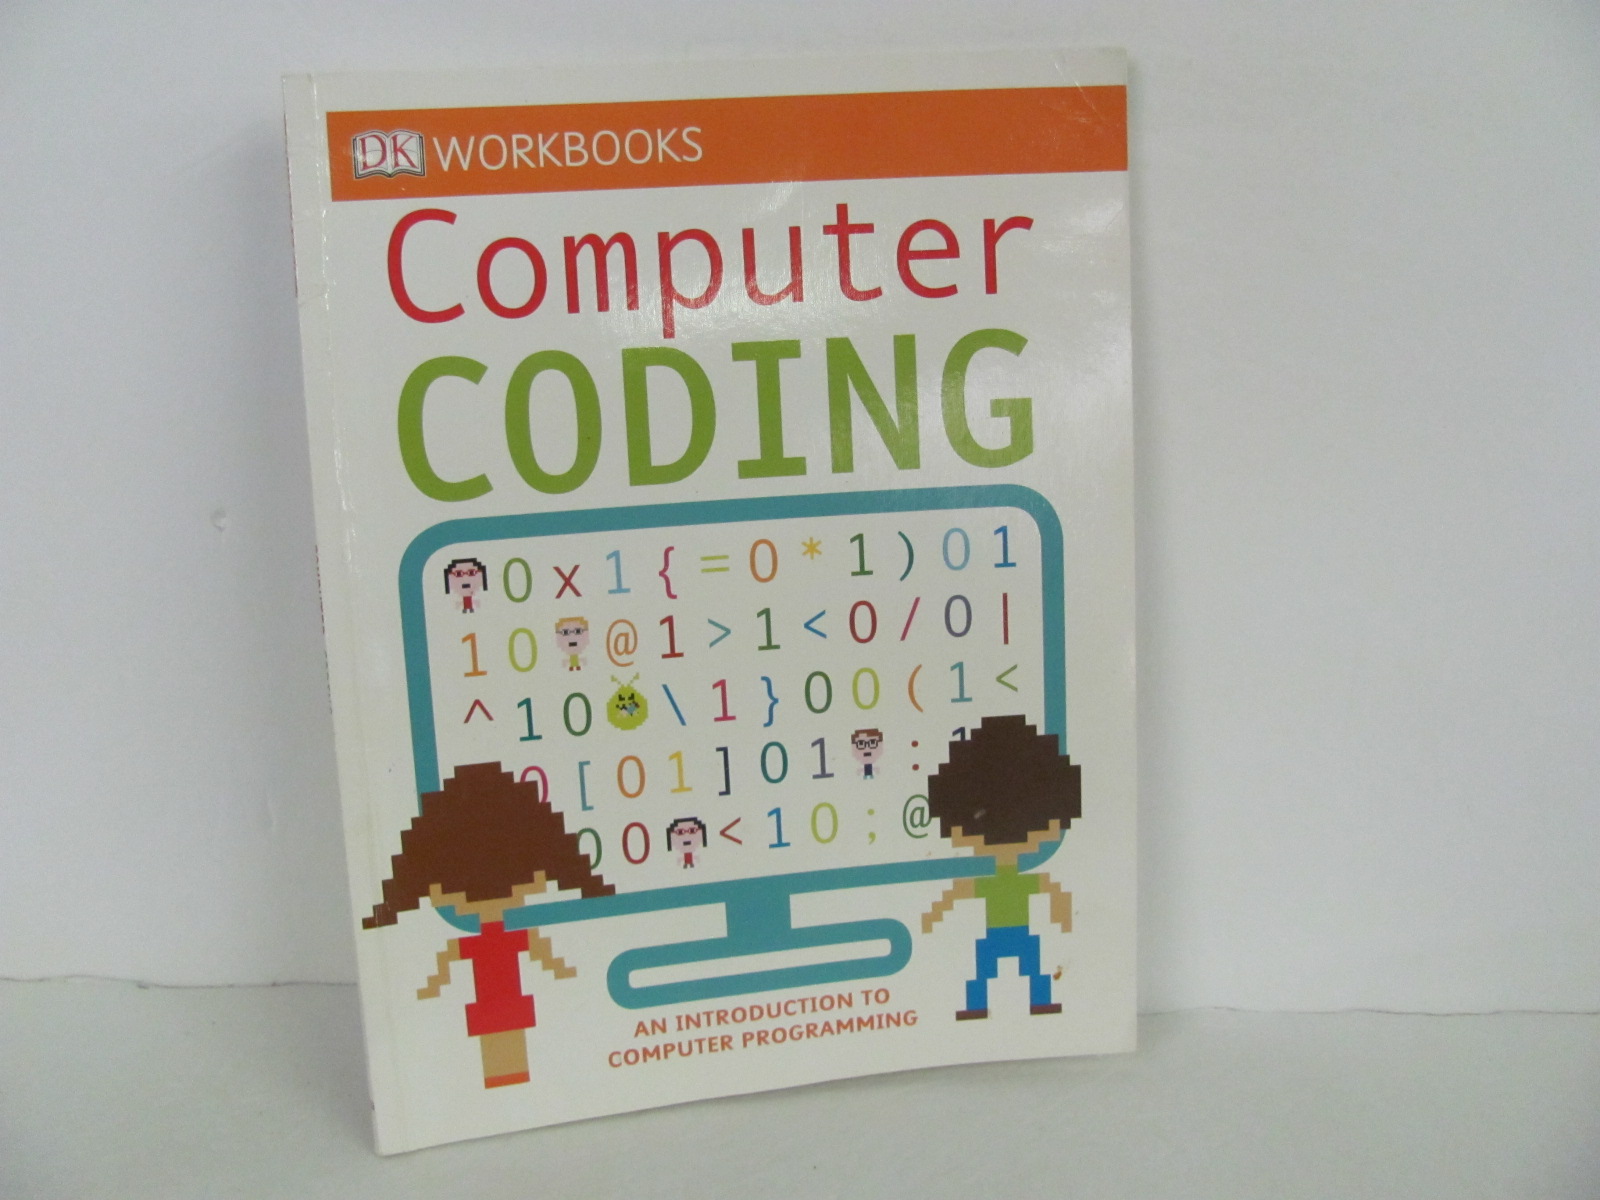 DK-Publishing-Computer-Coding-Used-Computer_343218A.jpg